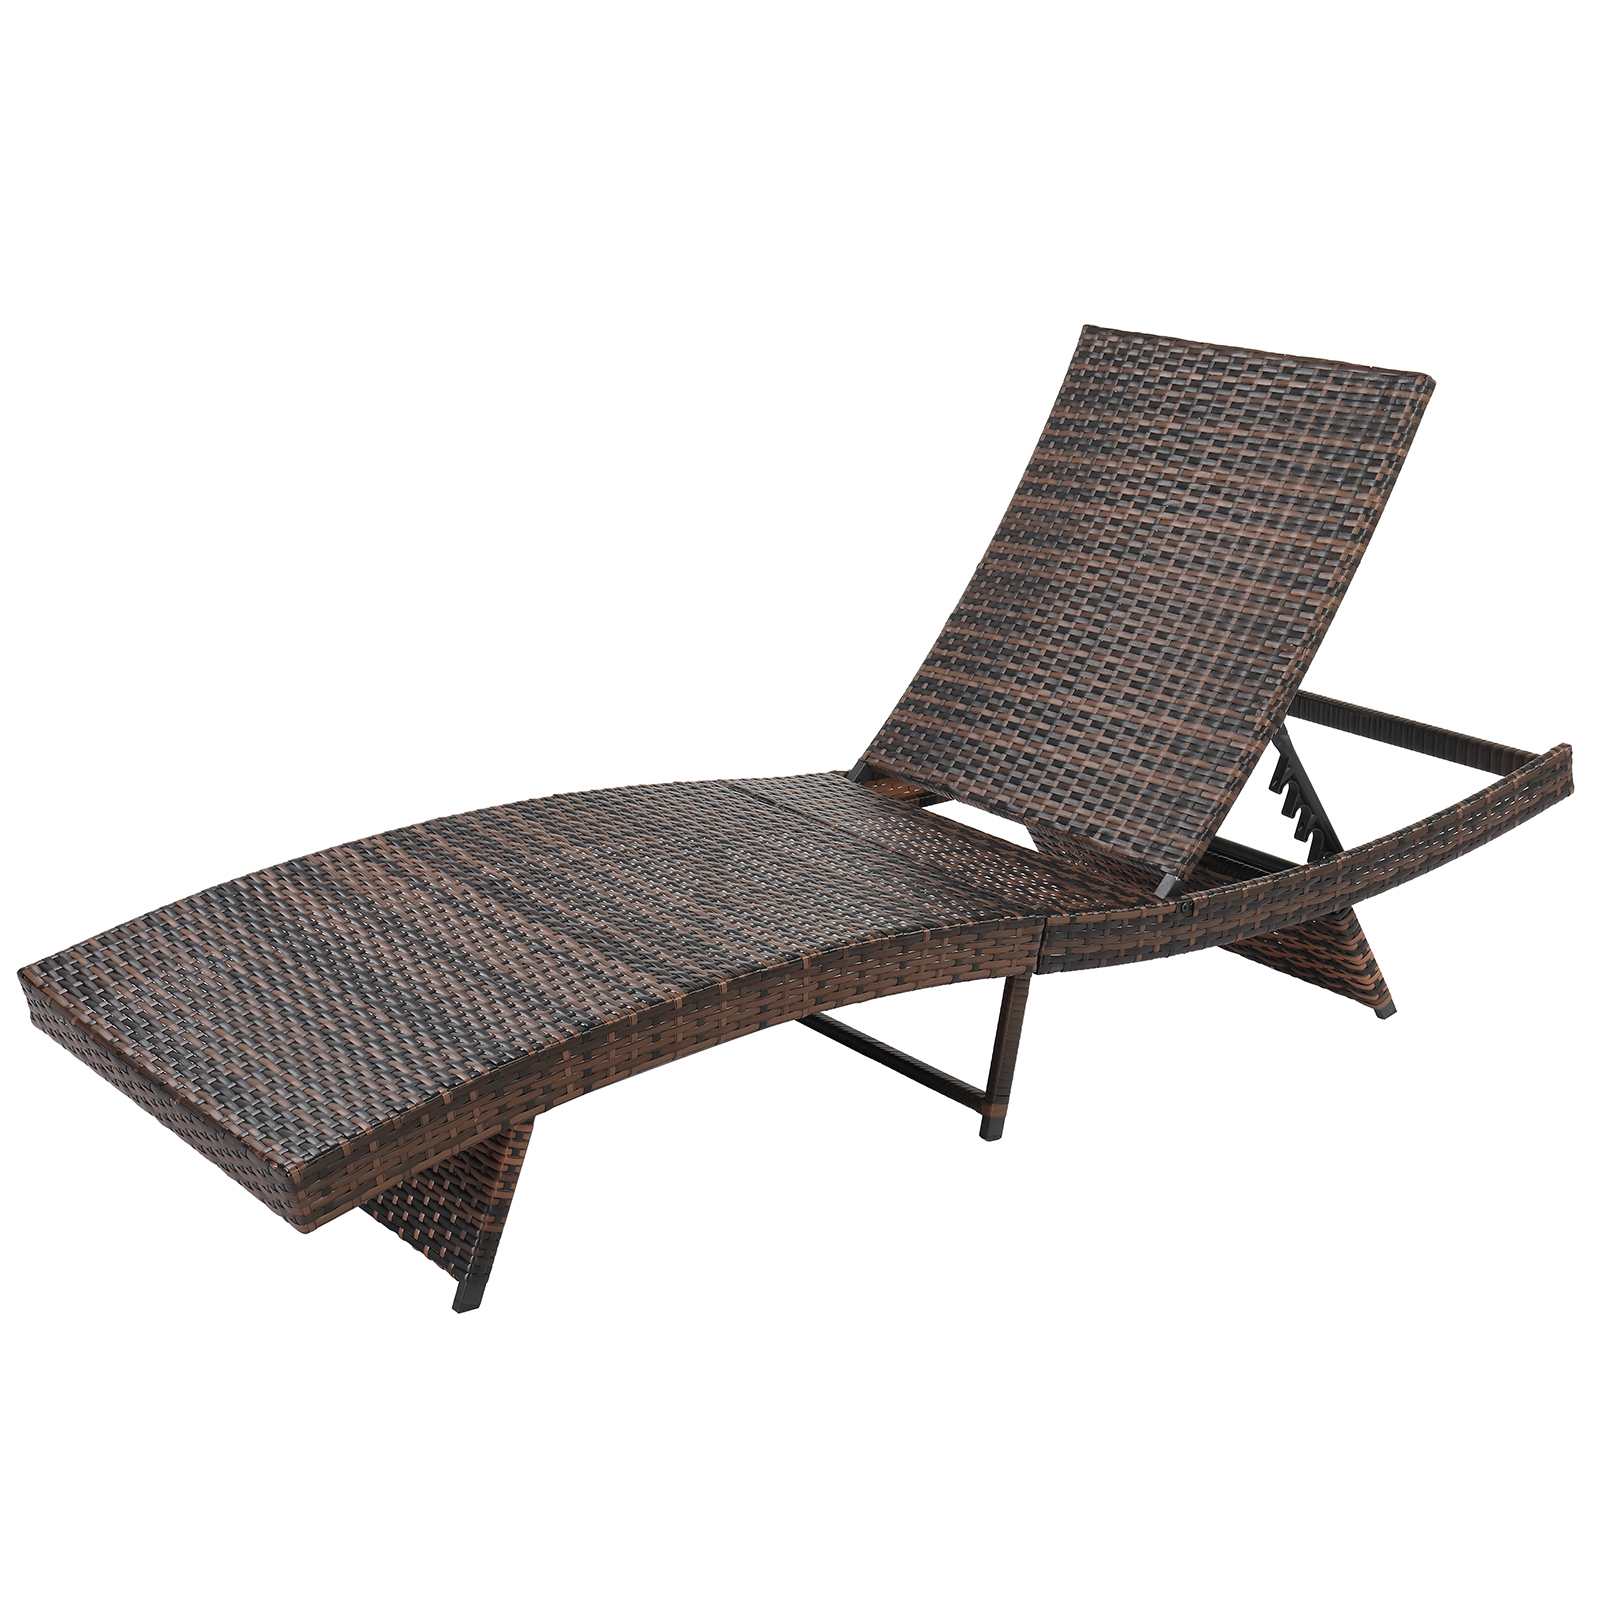 iTopRoad Products Aluminum Adjustable Chaise Lounge Chair with Cushion - image 2 of 6